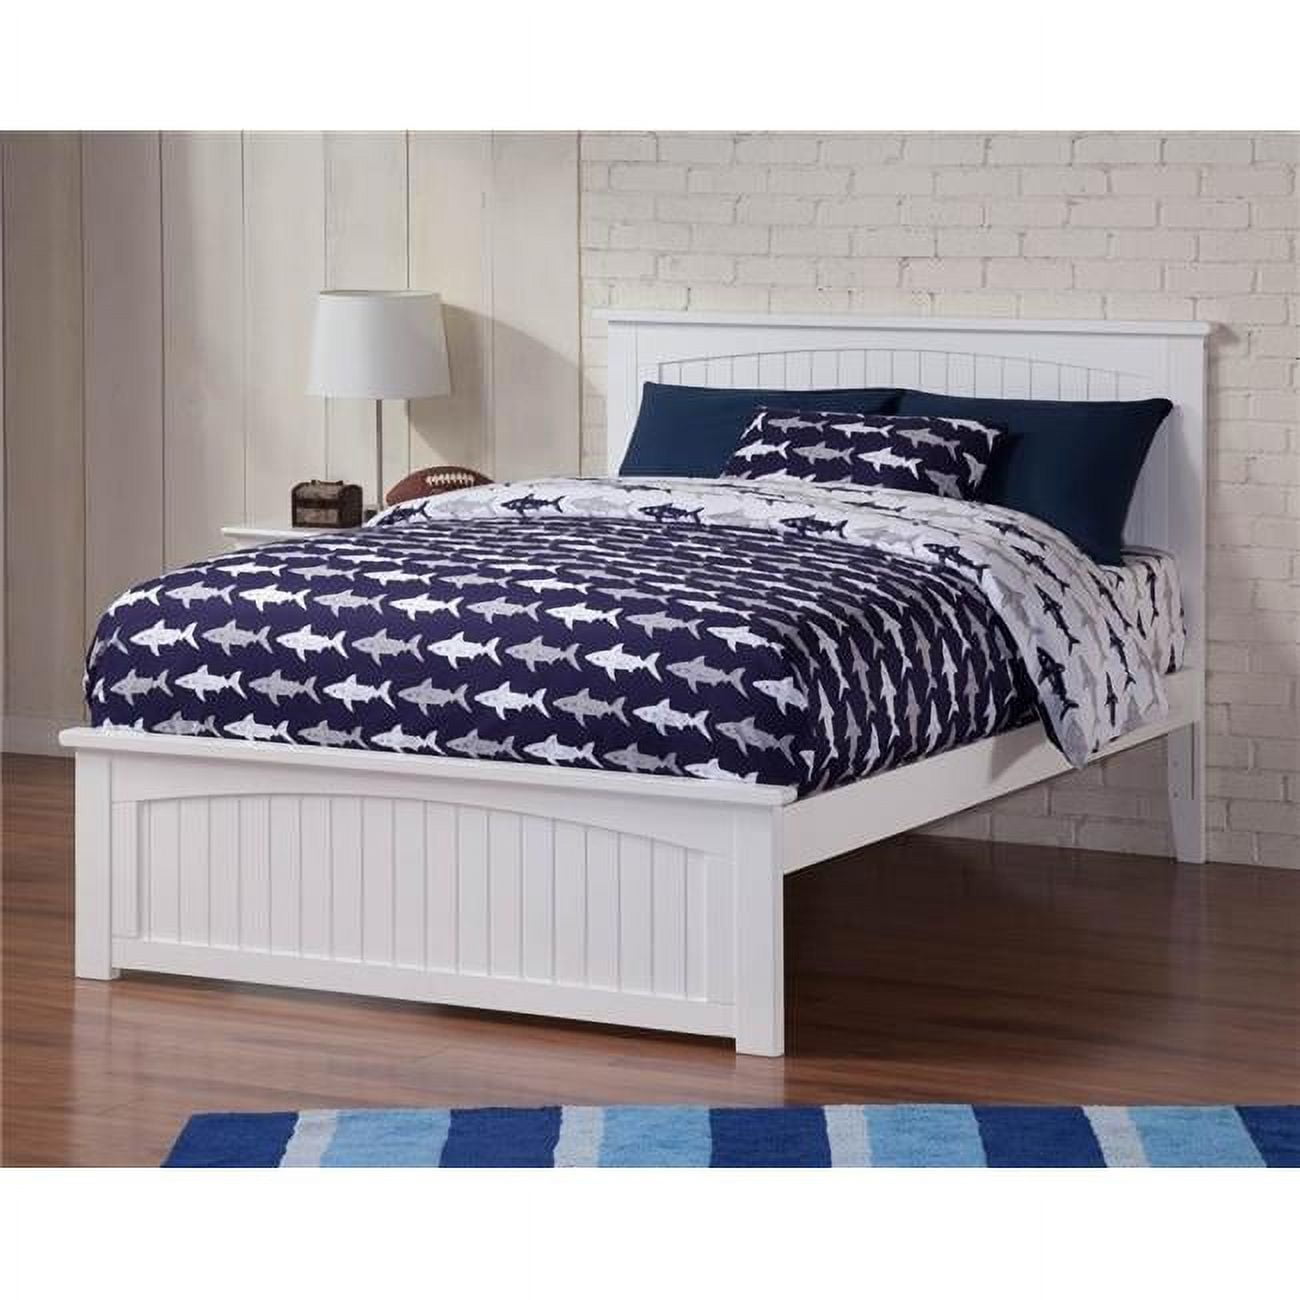 Picture of Atlantic Furniture AR8236032 Nantucket Bed with Match Footboard in White, Full Size